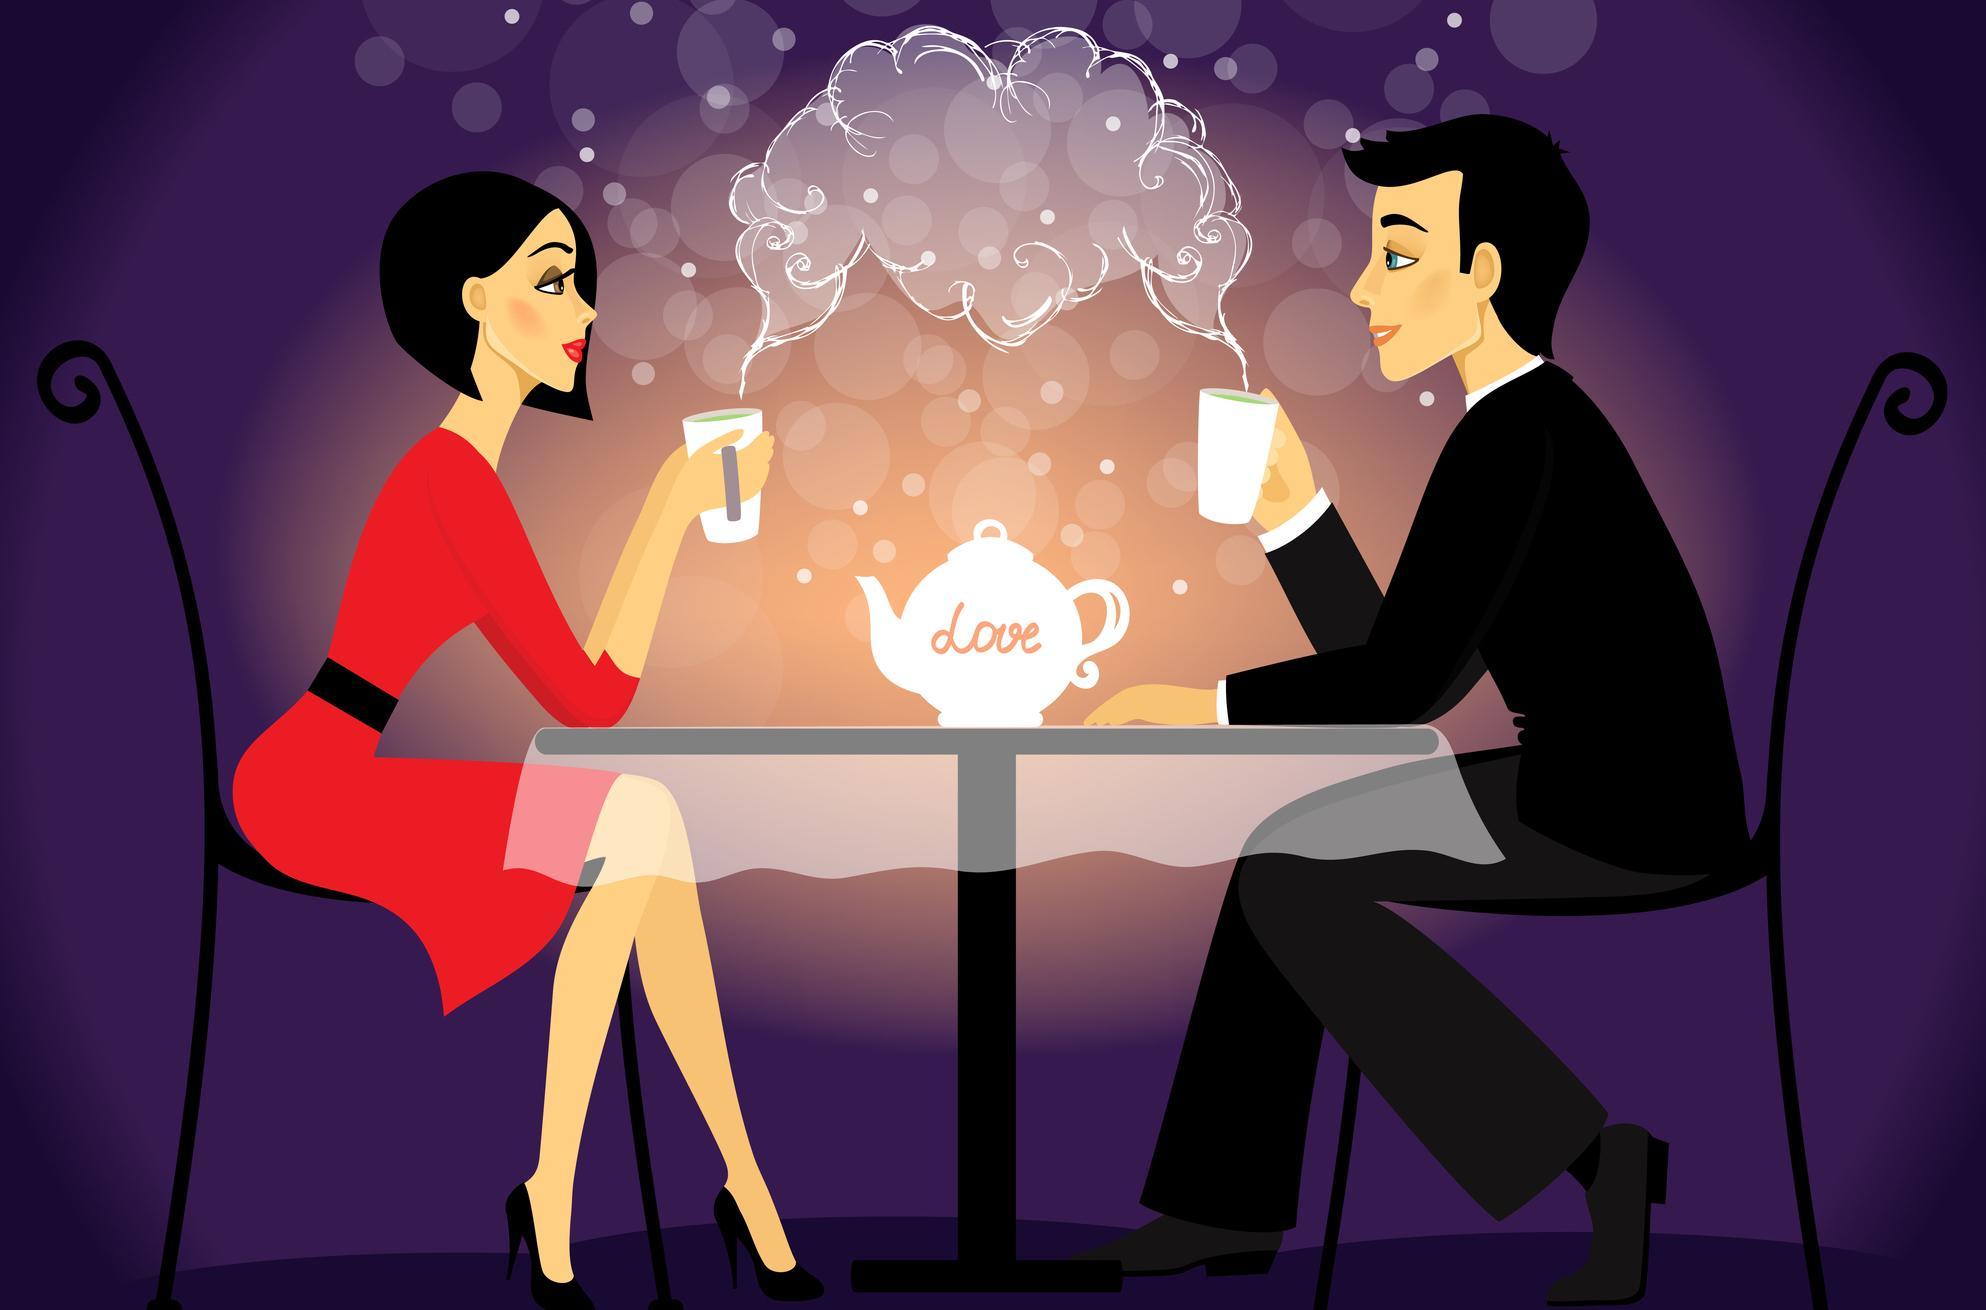 Speed dating virtual speed dating events across canada